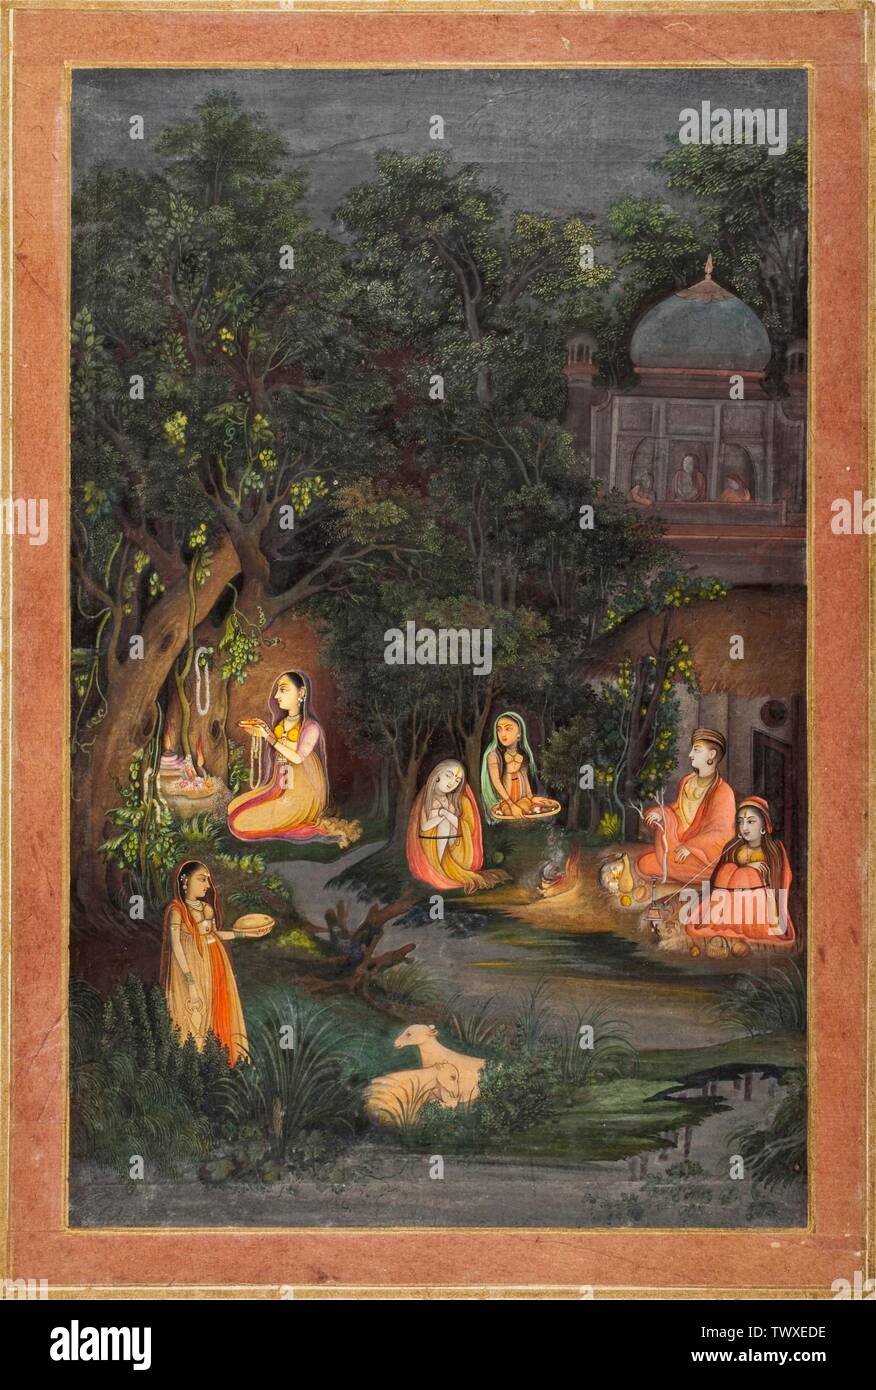 A Princess Visiting a Forest Shrine at Night (image 2 of 2);  India, Uttar Pradesh, Awadh, Lucknow, circa 1760 Drawings; watercolors Opaque watercolor and gold on paper Purchased in memory of Emeritus Professor Roy C. Craven, Jr. with funds provided by the Southern Asian Art Council, Stephen Markel, Lorna Andreae Craven, Pierre Andreae, Jay and Kathleen Craven, Ruth and Bill Beesch, Mark Zebrowski and John Robert Alderman, R. and Dharini Charudattan, Austin B. Creel, Herbert H. Luke, Stephen Barry, Myra L. Engelhardt and Lawrence E. Malvern, Toby Falk, Claire and Earl Hale, Janice Le Stock Photo